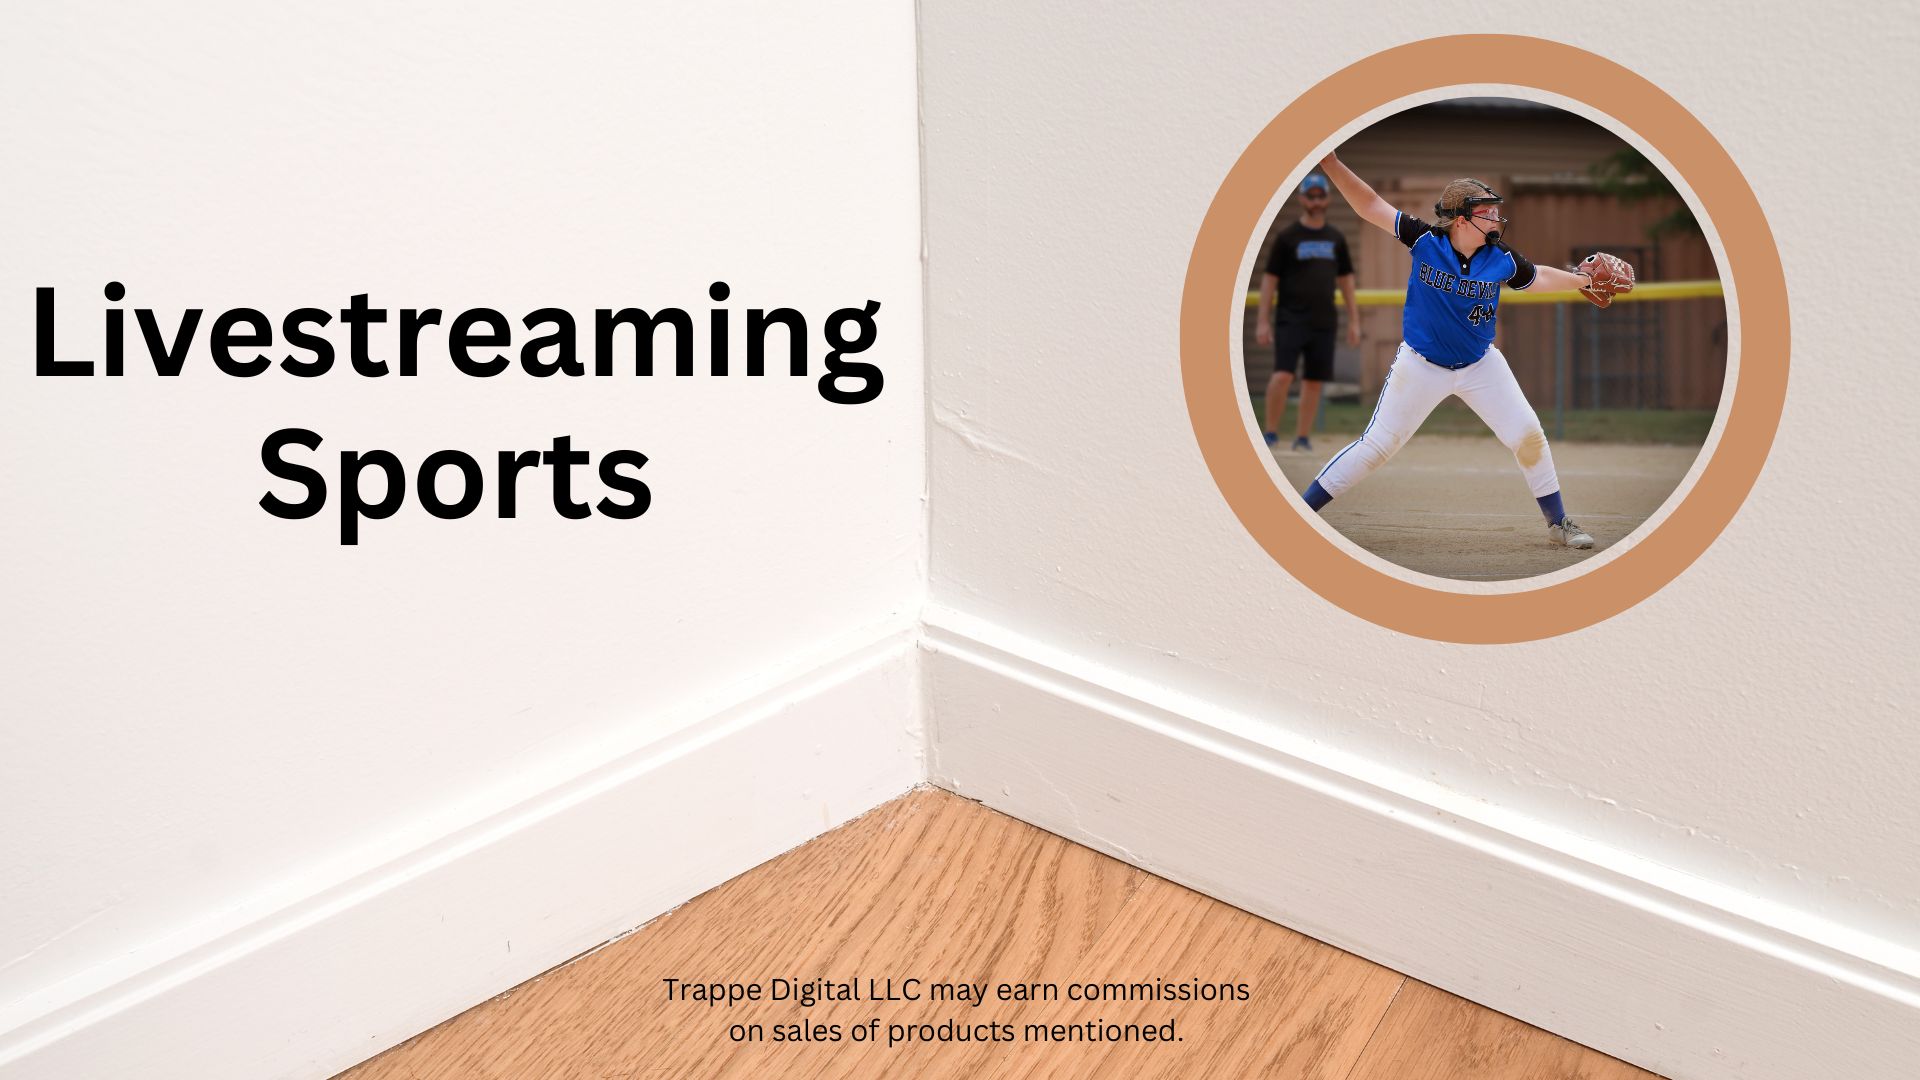 How to) Livestreaming softball or baseball games the easy way -